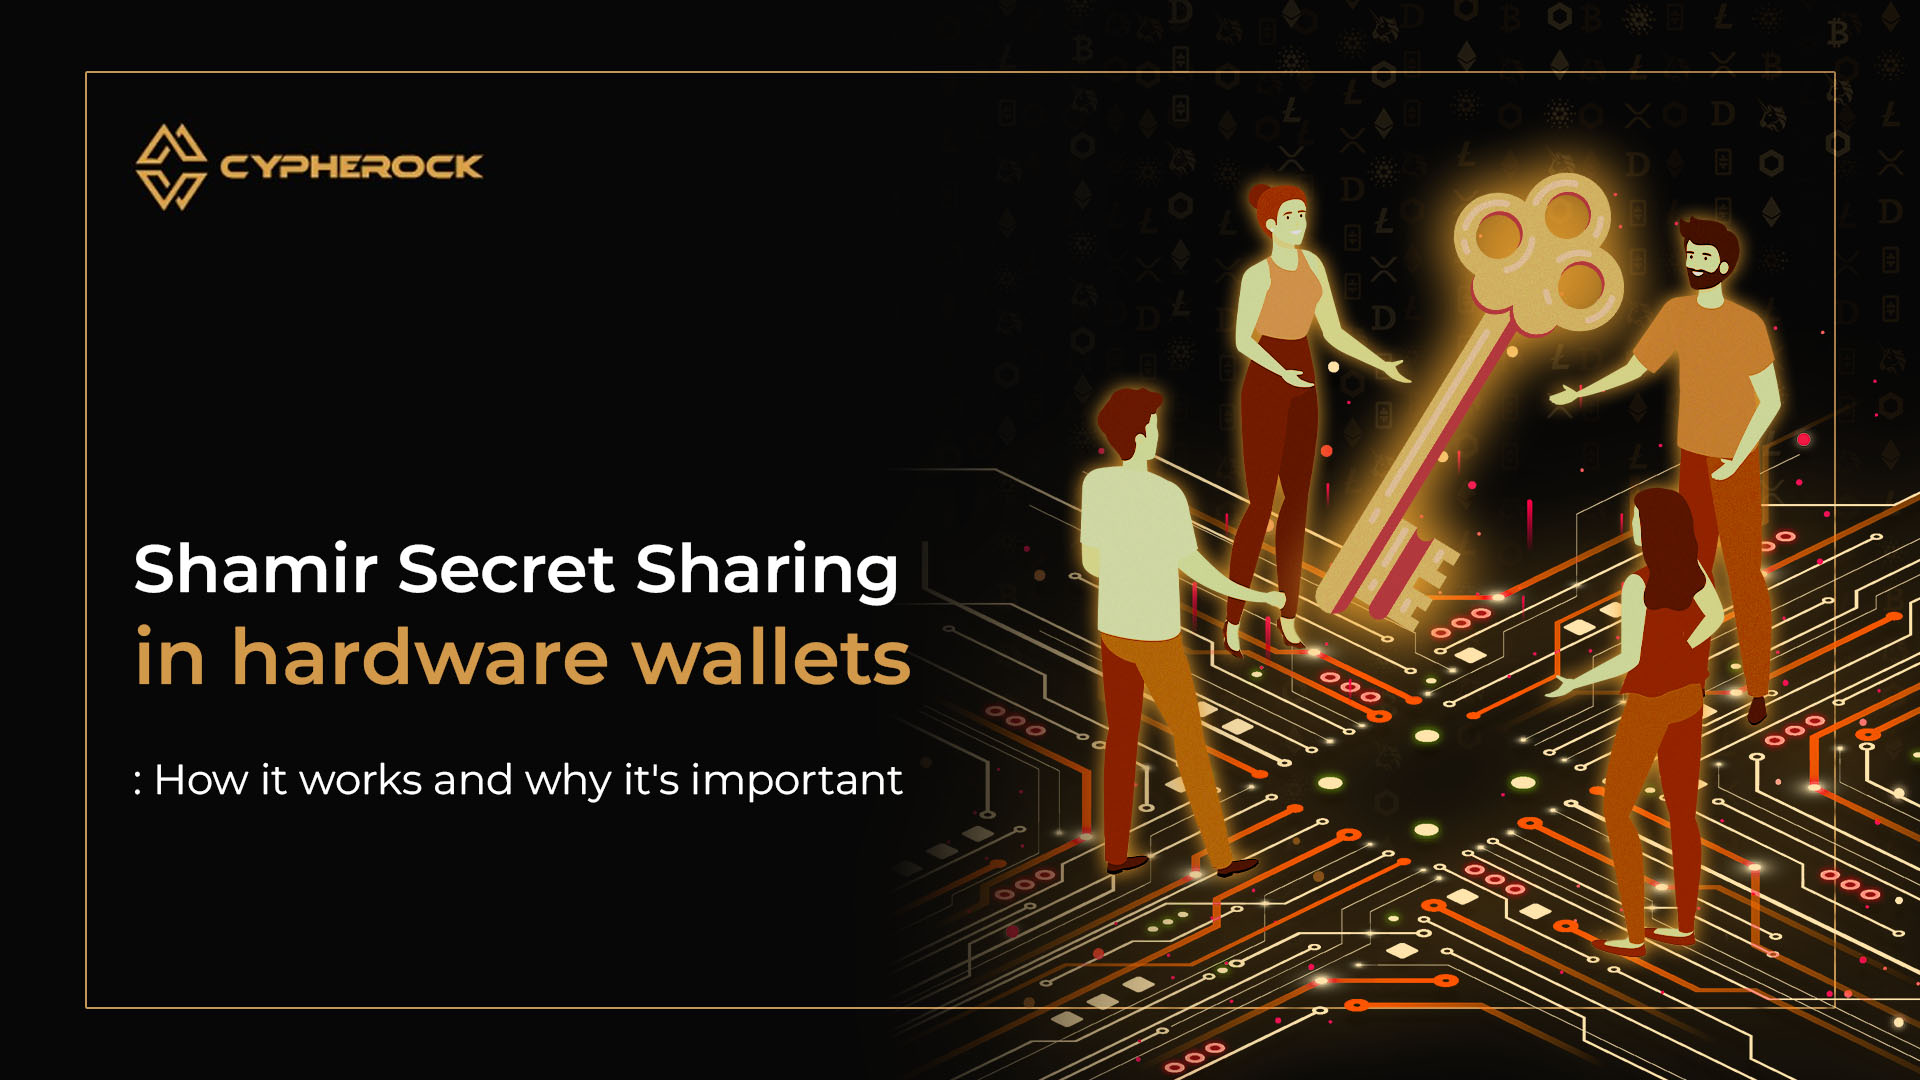 Shamir Secret Sharing in Hardware Wallets: How it Works and Why it's Important